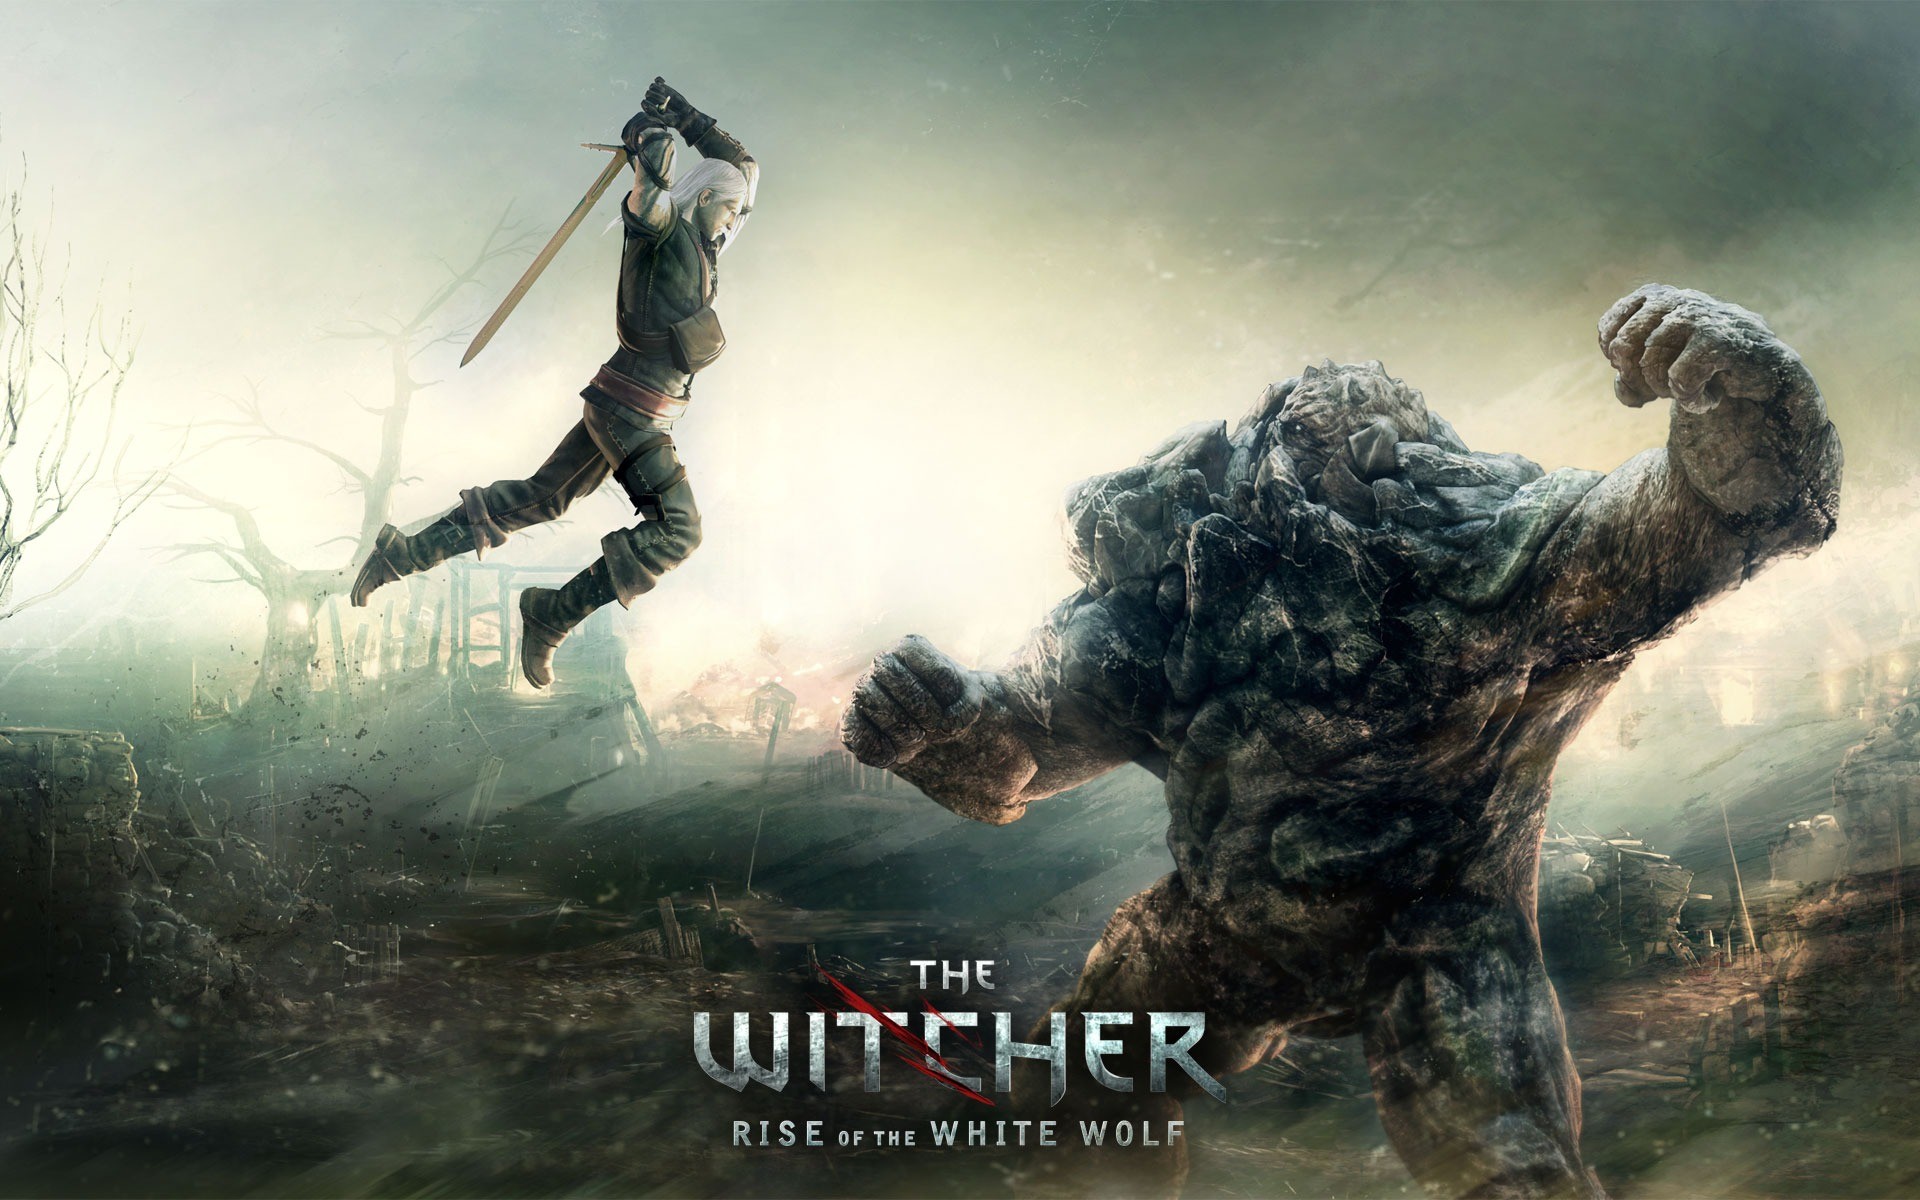 1920x1200 The Witcher Rise of the White Wolf Wallpaper The Witcher Games